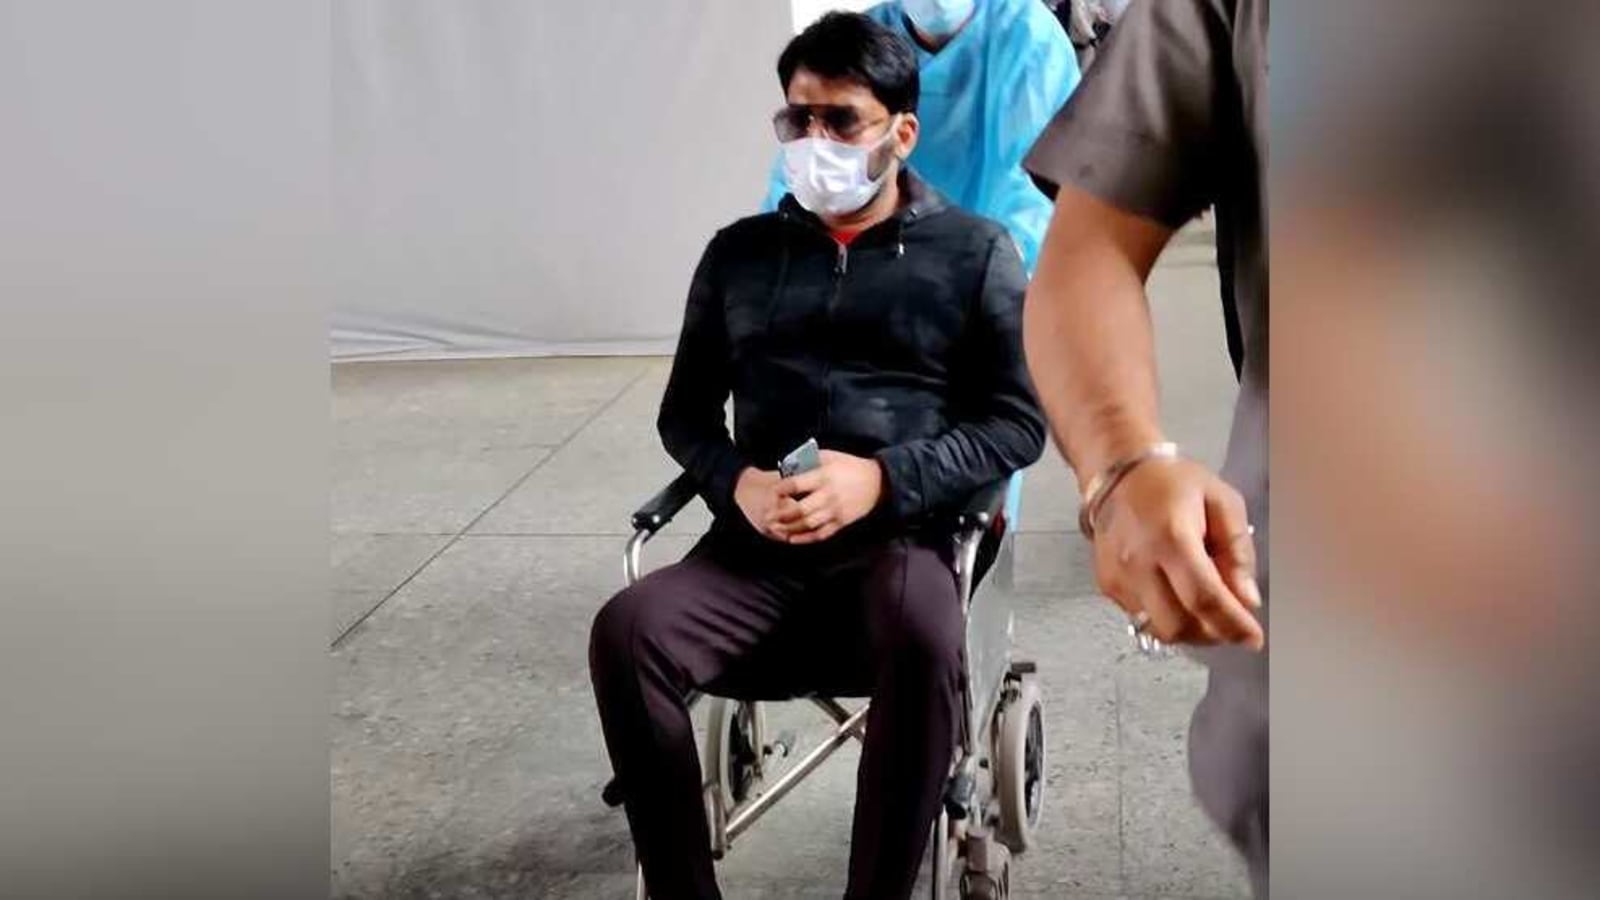 After Kapil Sharma was spotted at Mumbai airport on a wheelchair, Paparazzi gathered to ask him questions and he lost his cool.